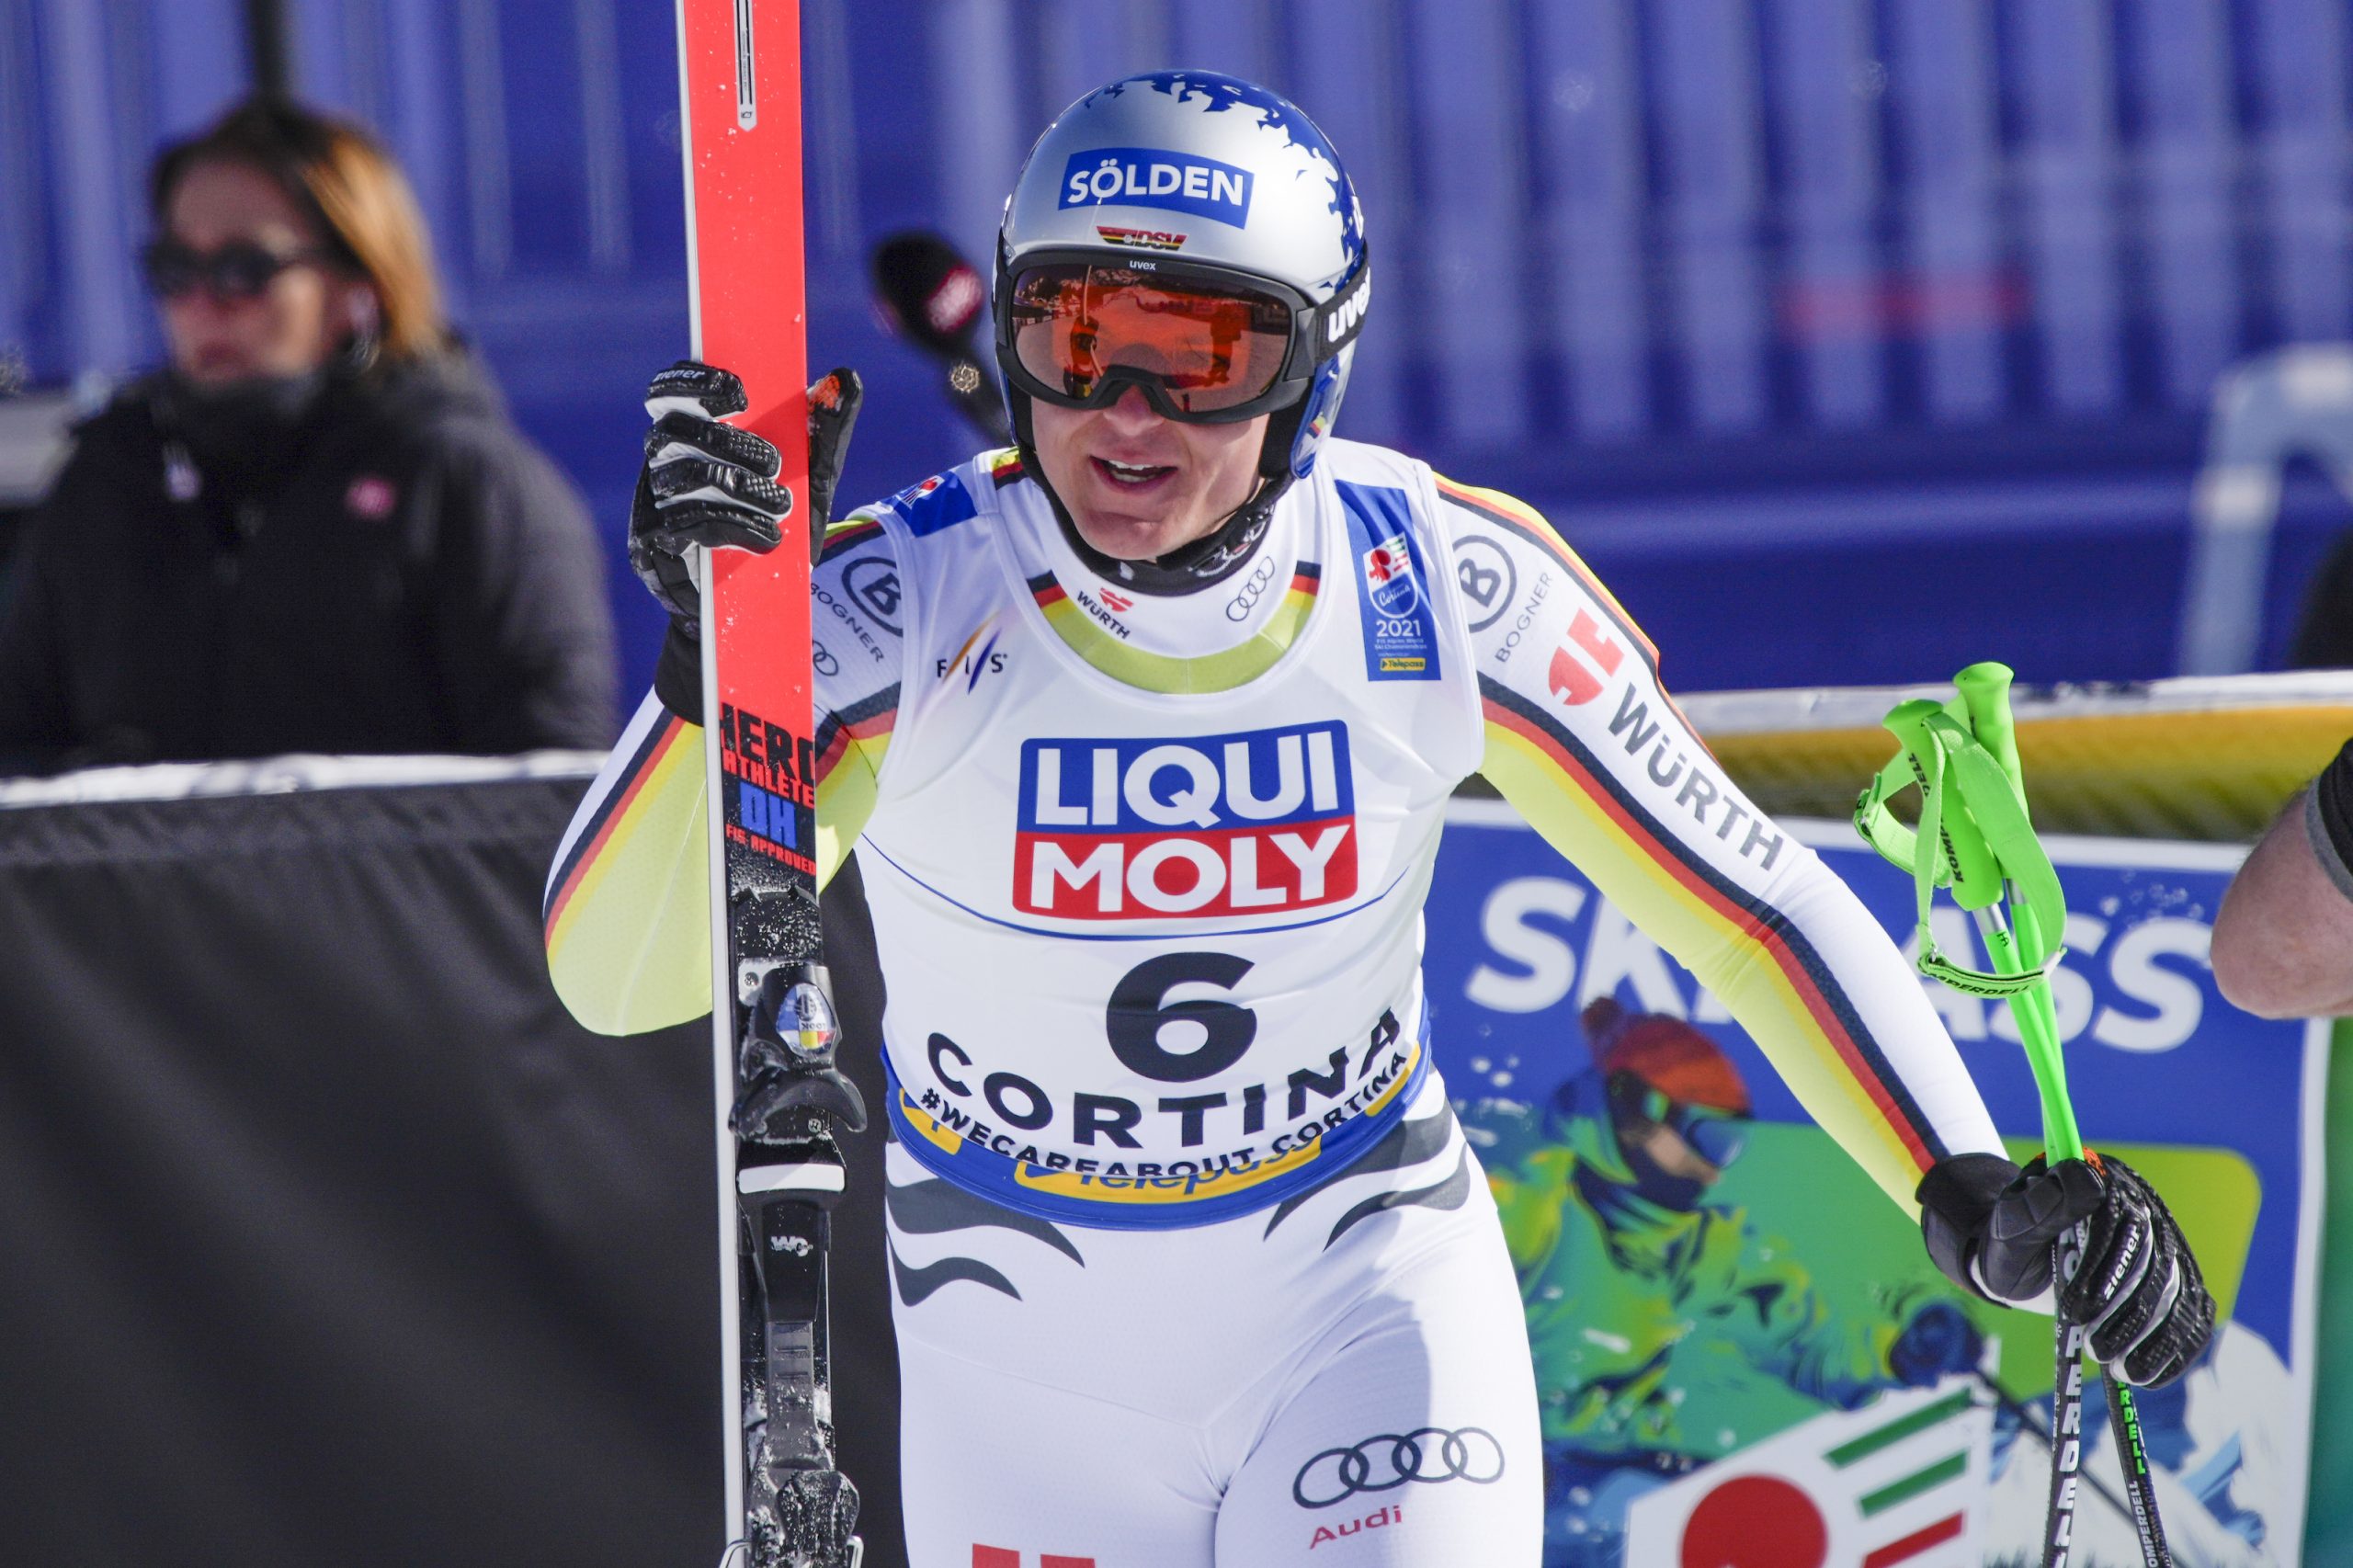 Skier Dreßen after knee injury: "The body is not made for such extreme loads"